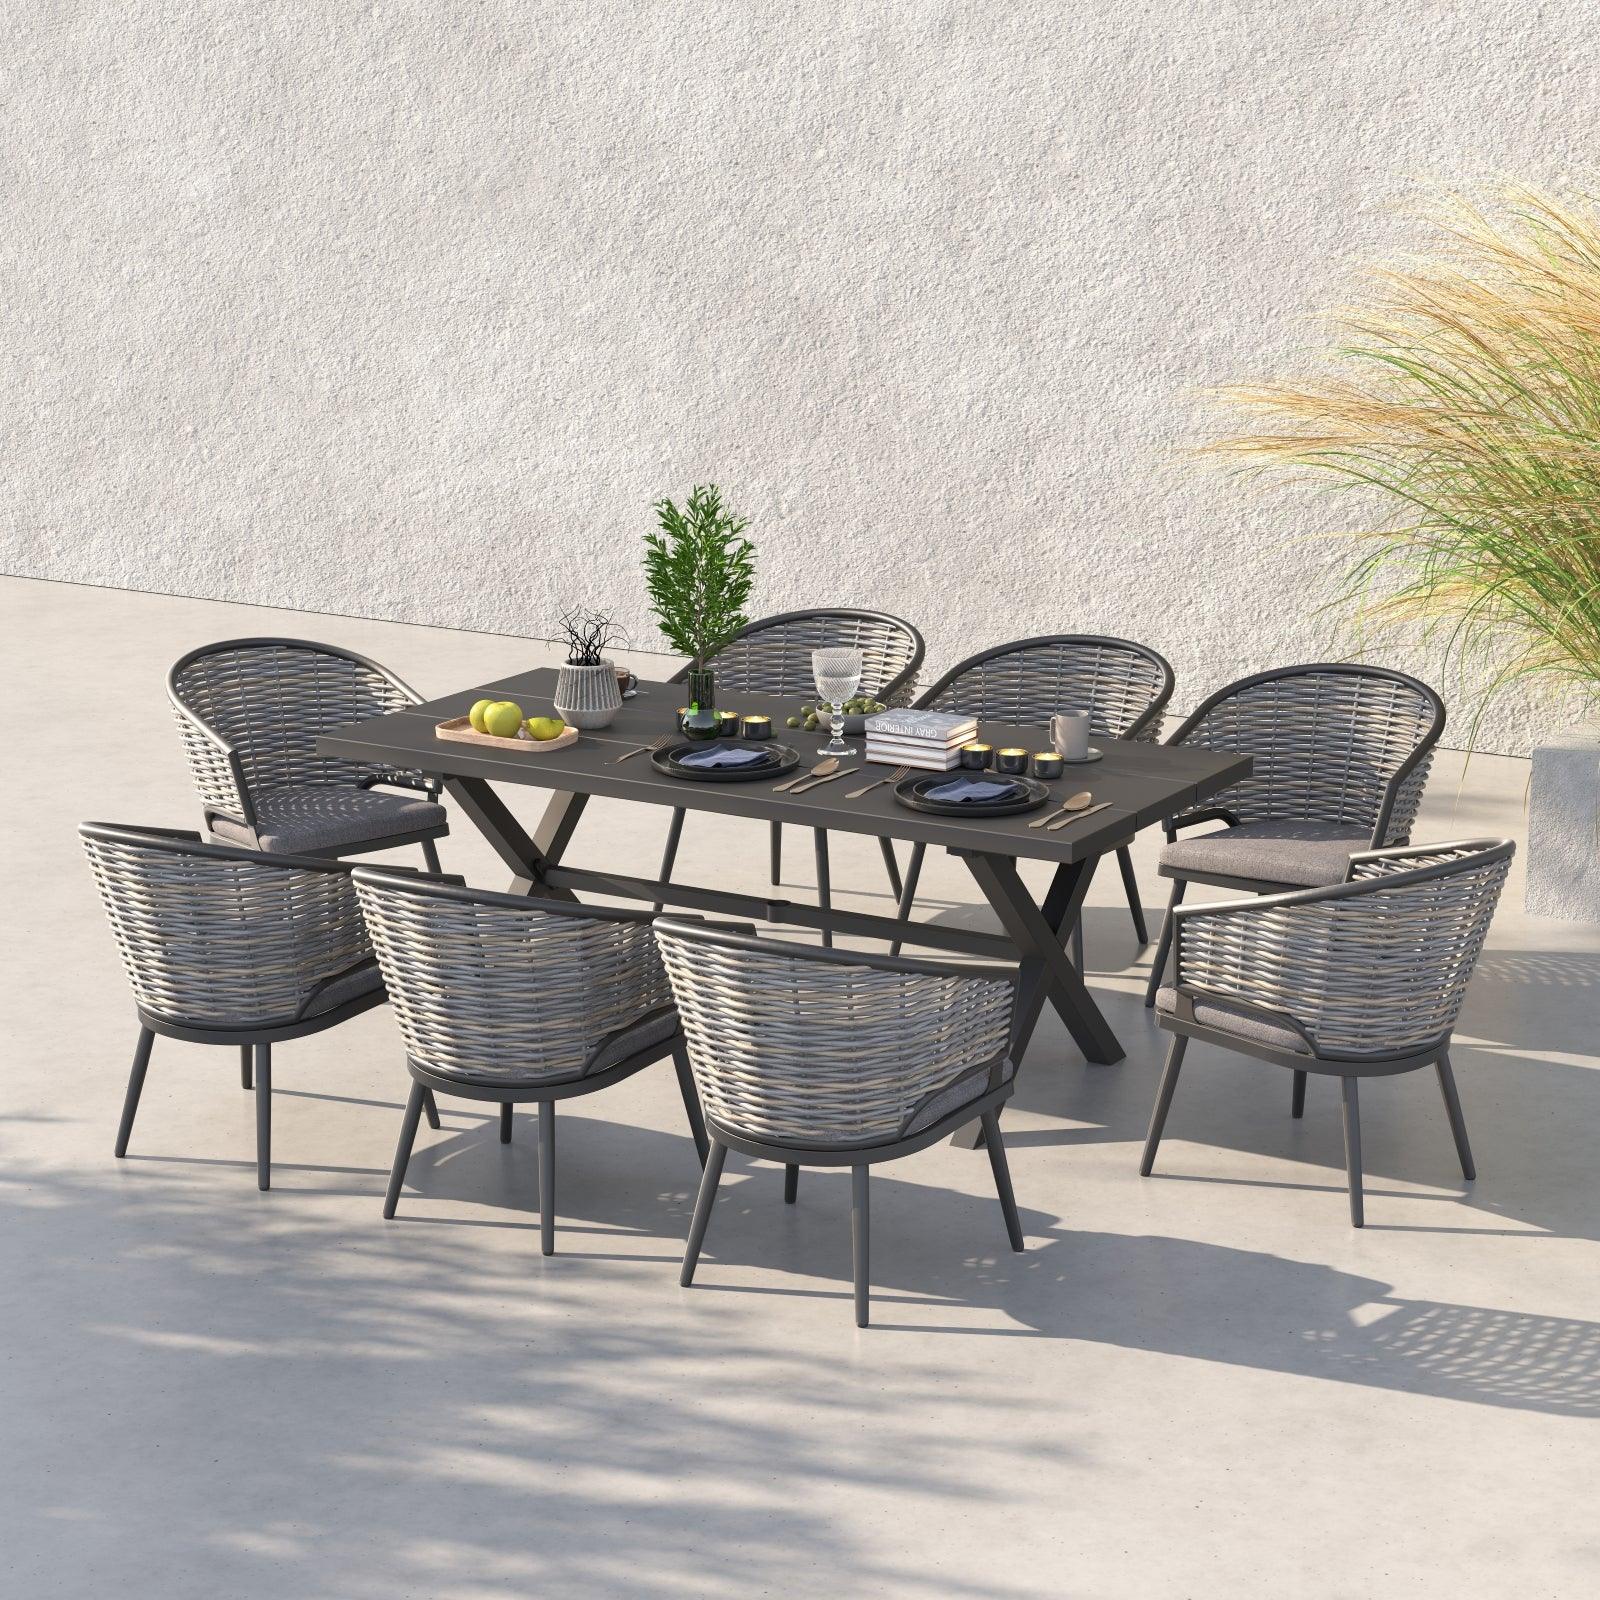 Burano Modern HDPE Wicker Outdoor Furniture, Grey wicker outdoor Dining Set with aluminum frame, 8 chairs with grey cushions, 1 aluminum X-Shaped rectangle dining Table, outdoors - Jardina Furniture #Pieces_9-pc.